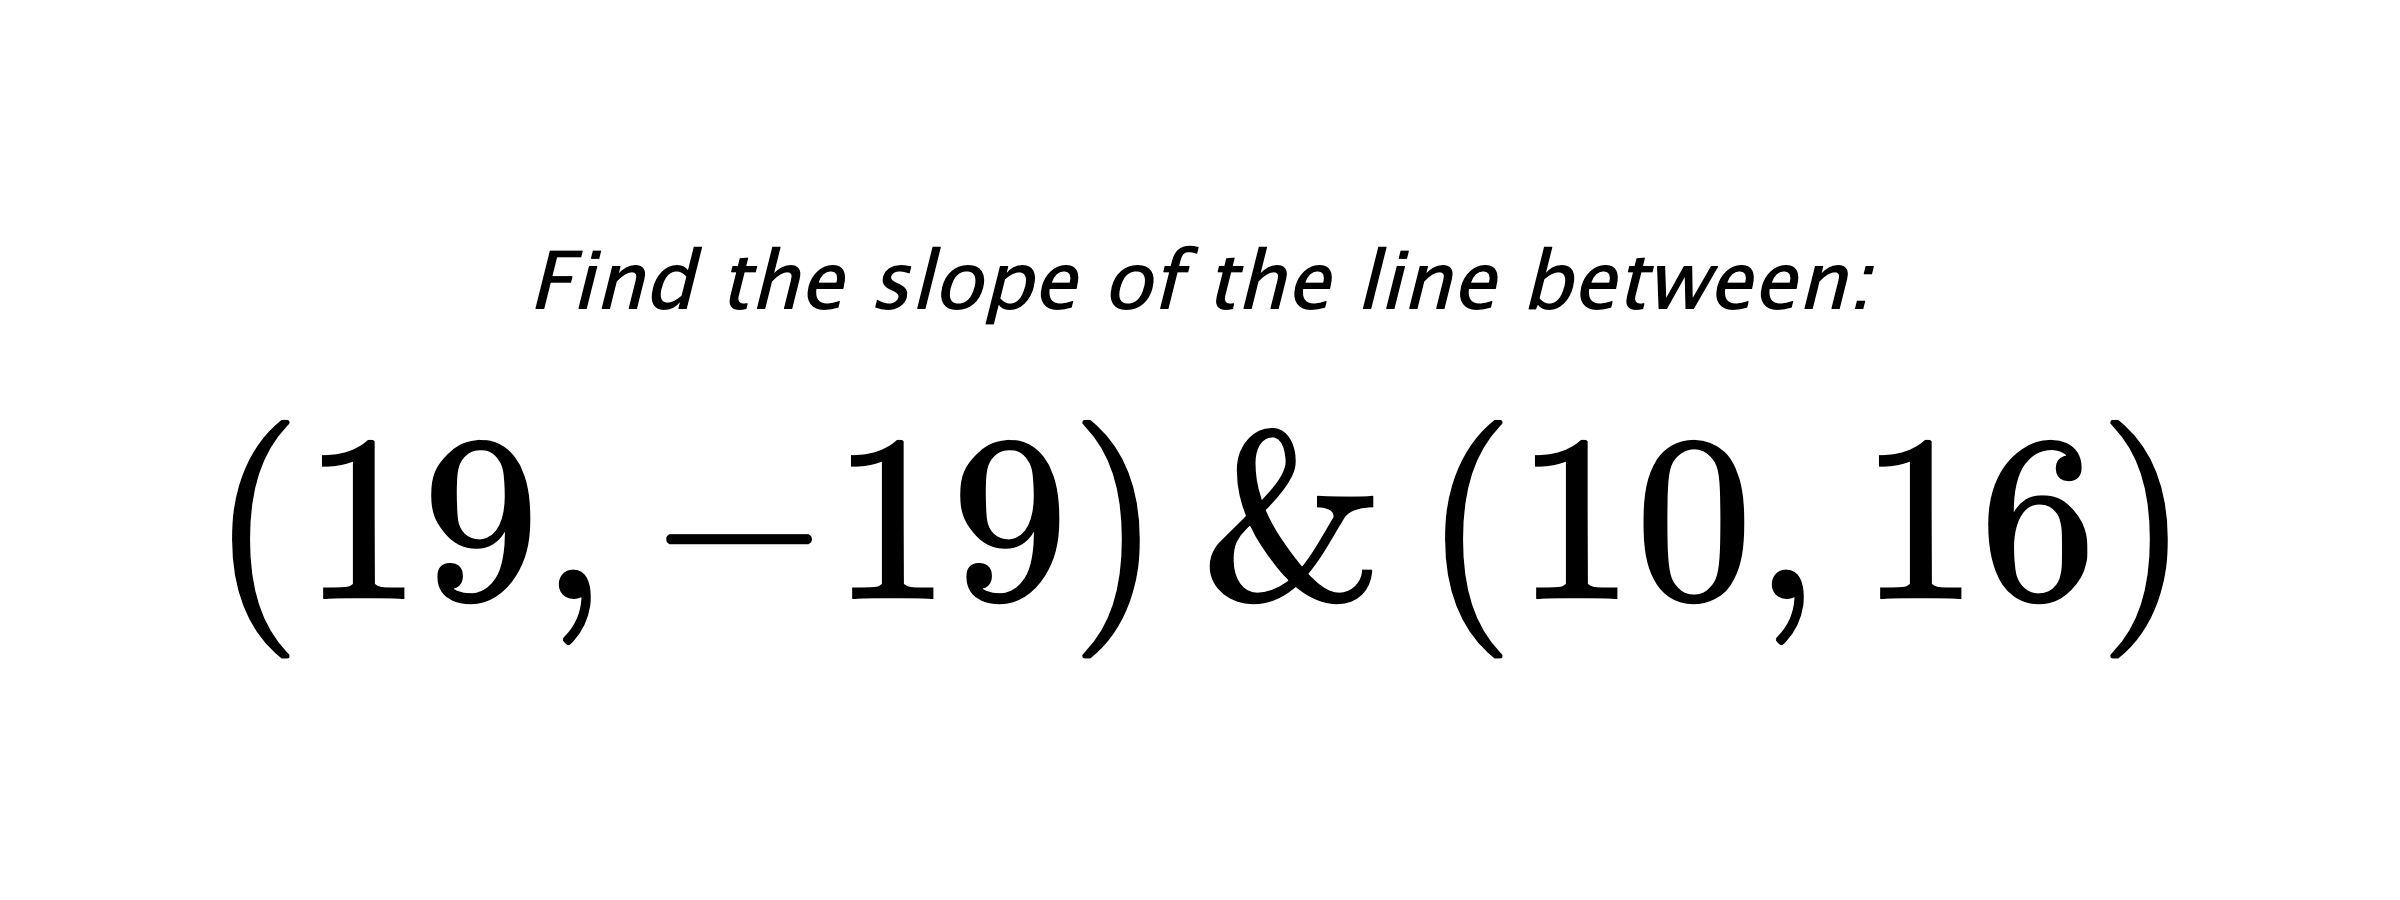 Find the slope of the line between: $ (19,-19) \hspace{0.5cm} \text{&} \hspace{0.5cm} (10,16) $